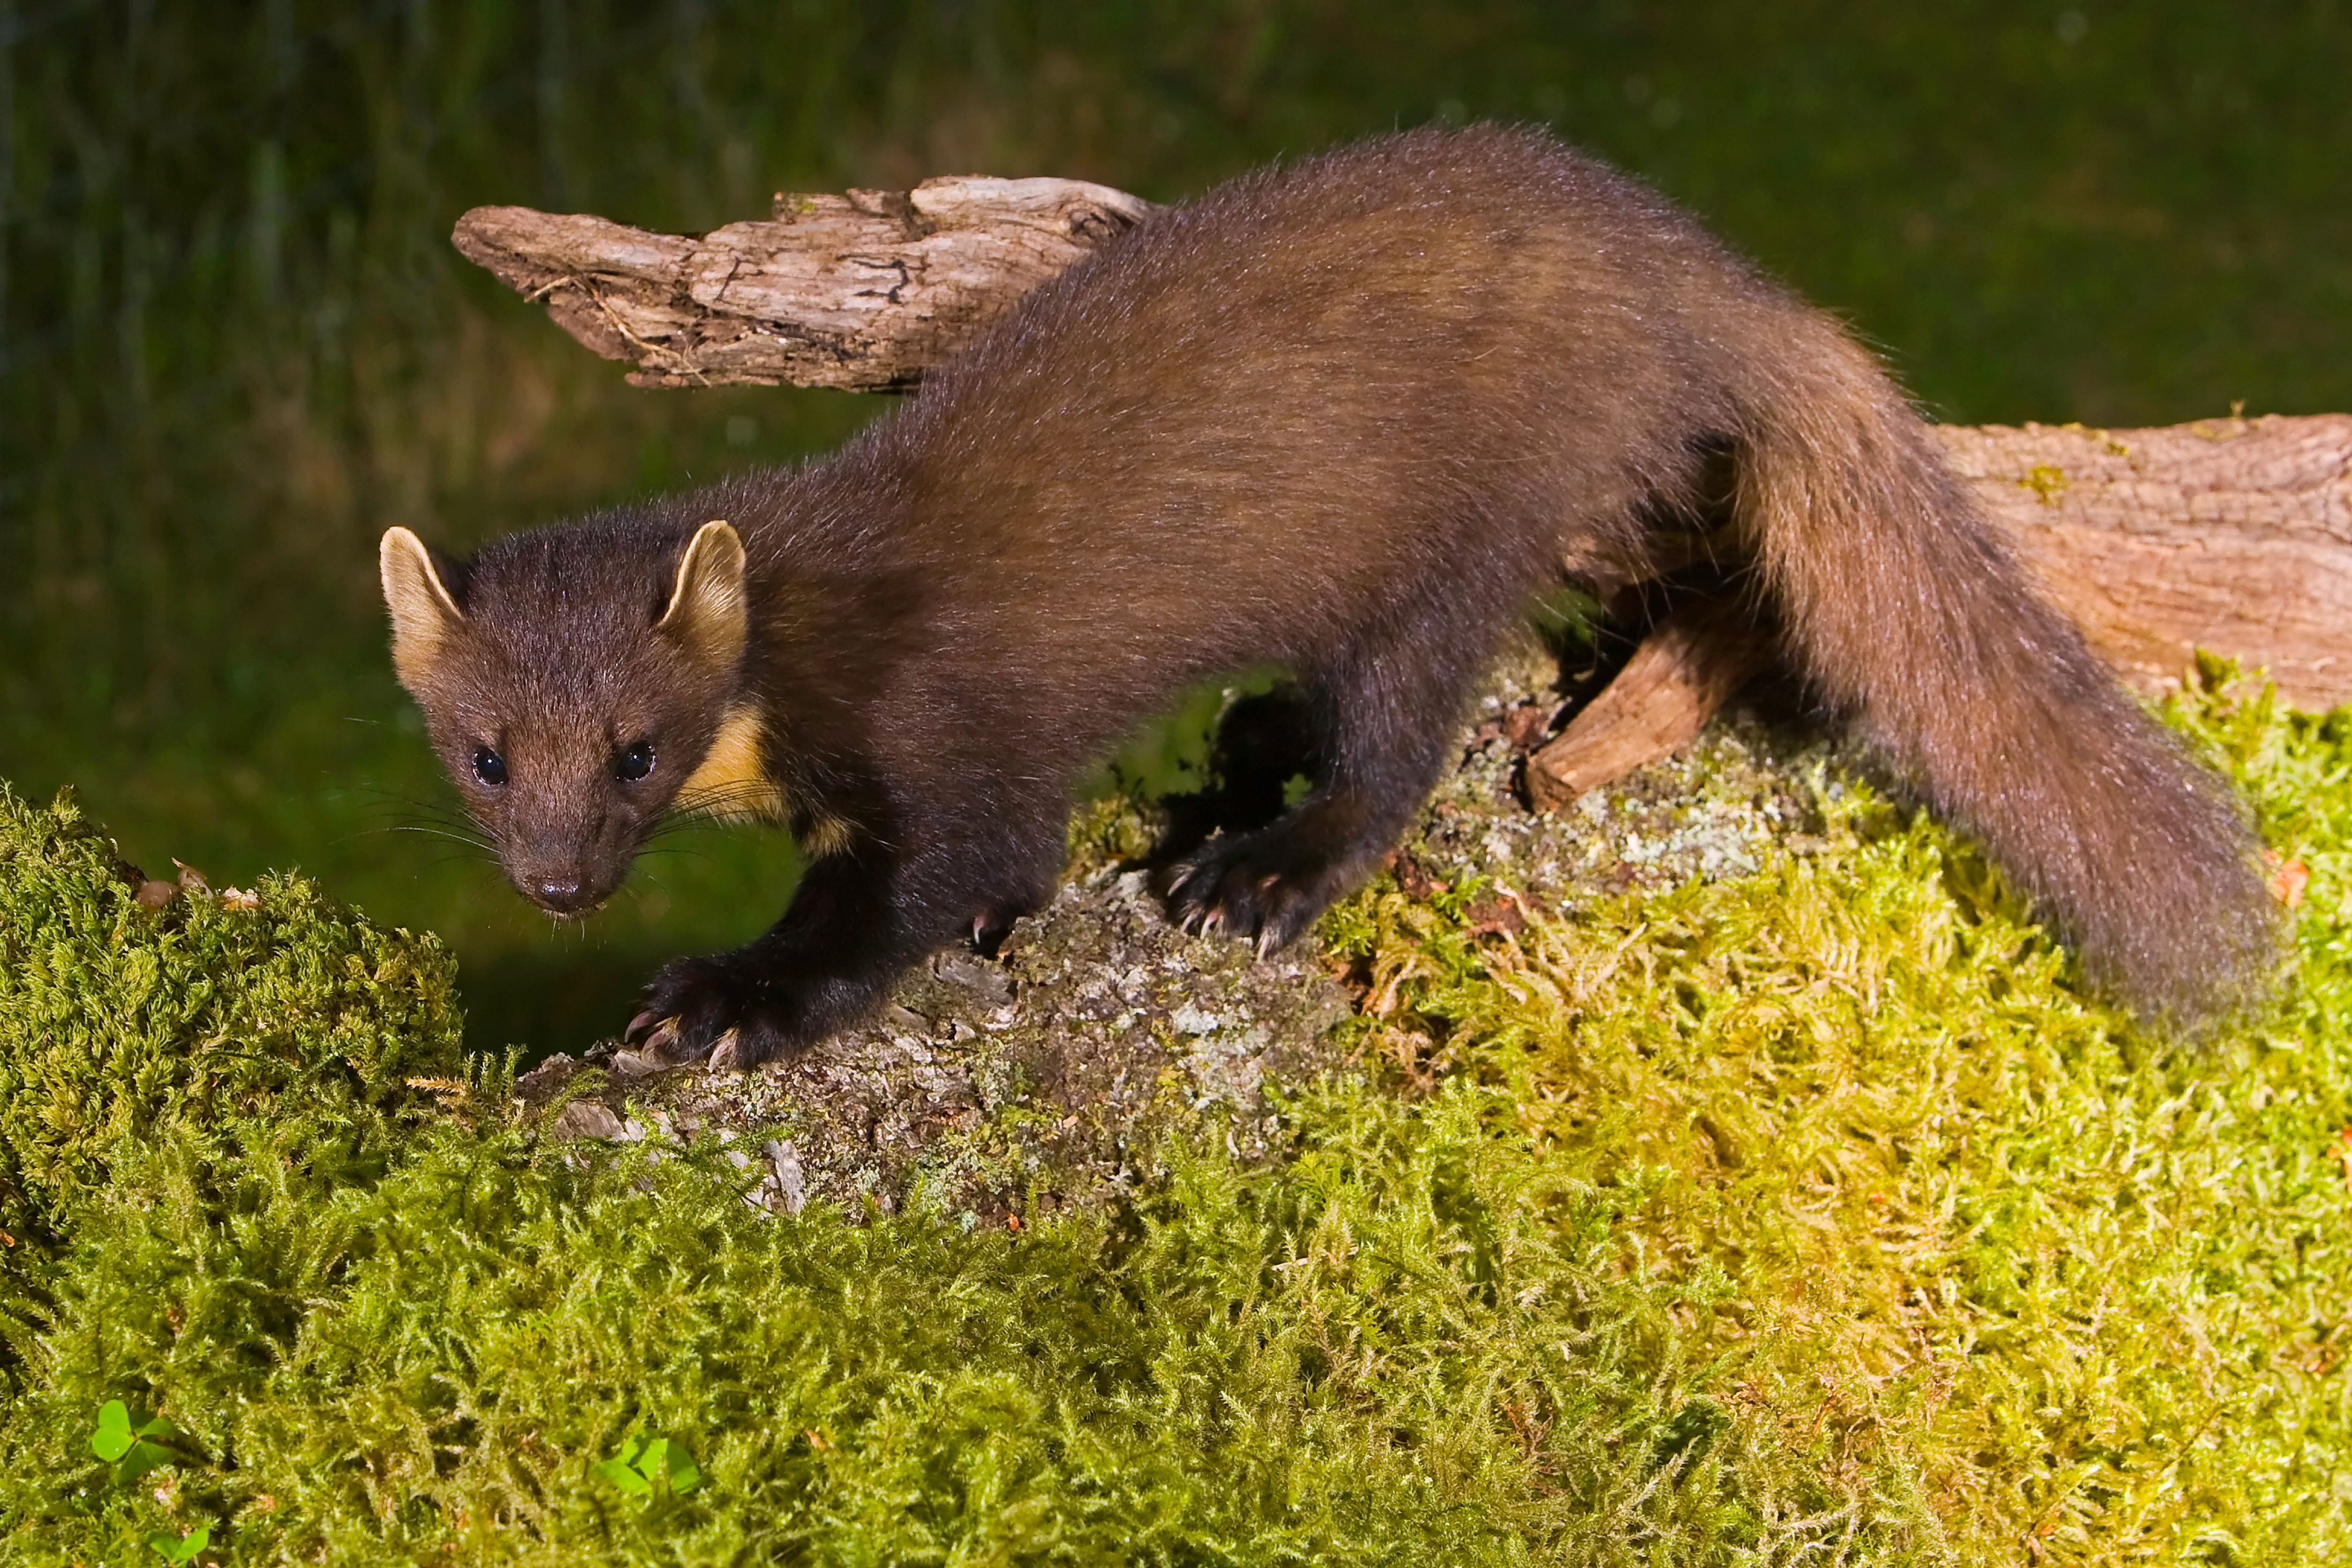 Hopes for pine marten numbers in England's biggest forest 